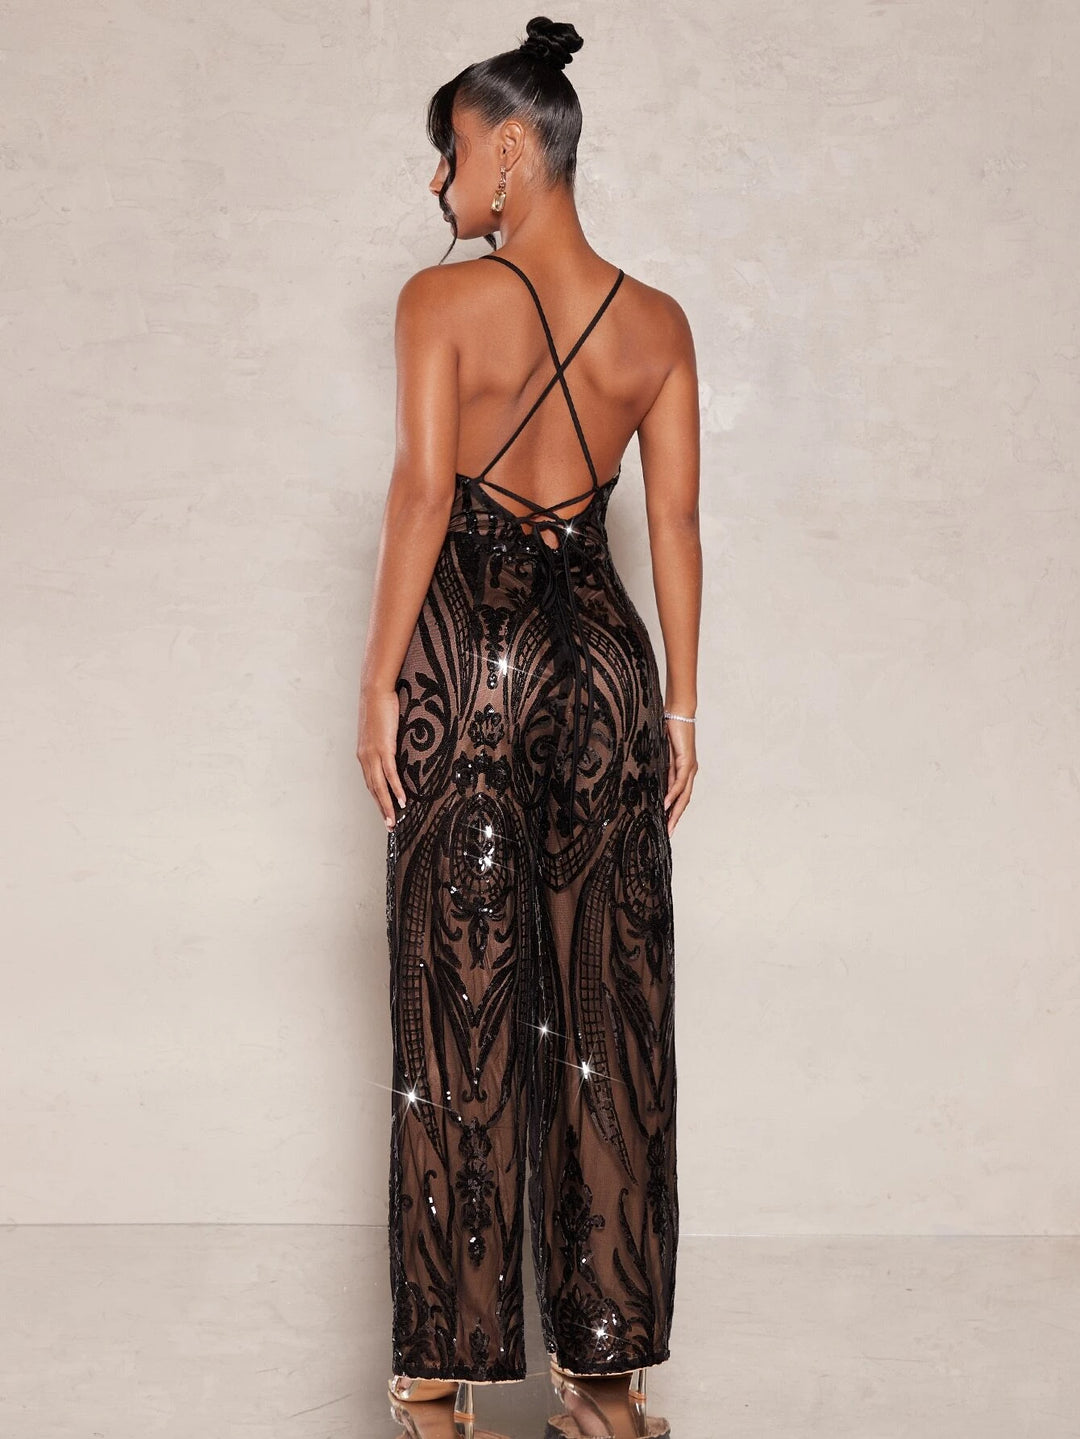 Lace Up Backless Sequin Cami Jumpsuit